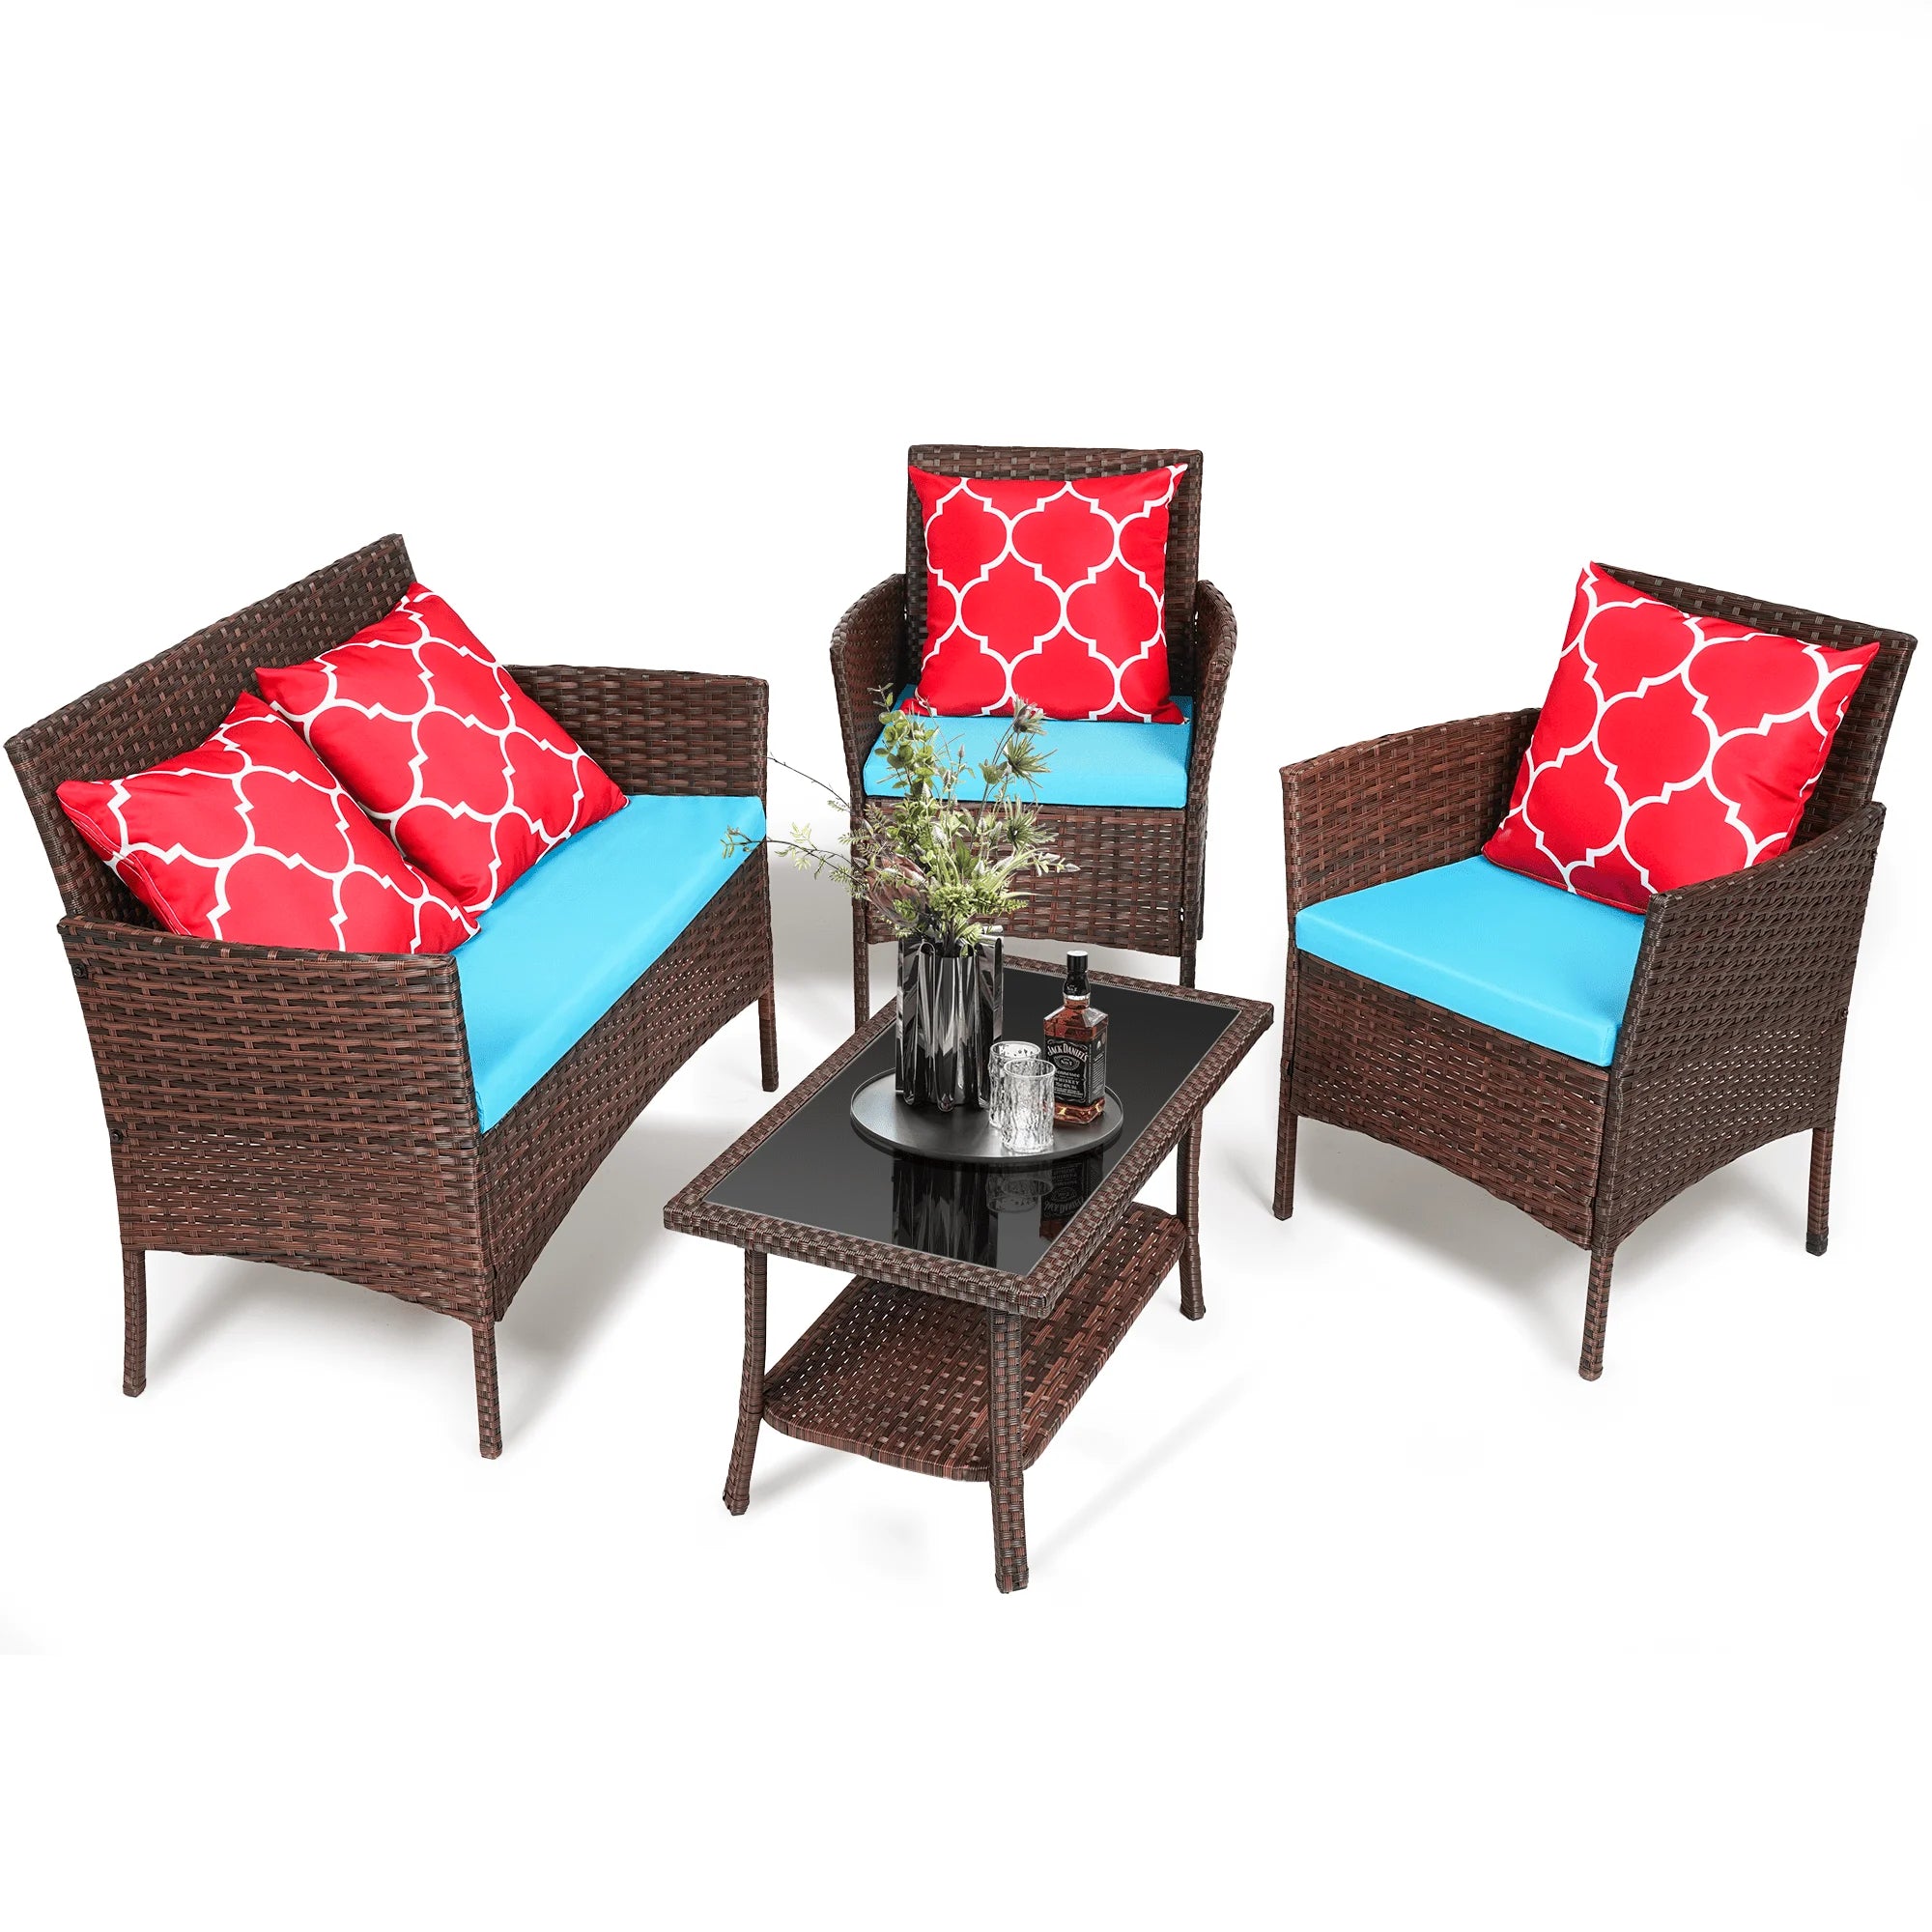 4 Piece Patio Furniture Set with Throw Pillows (2 Colors)